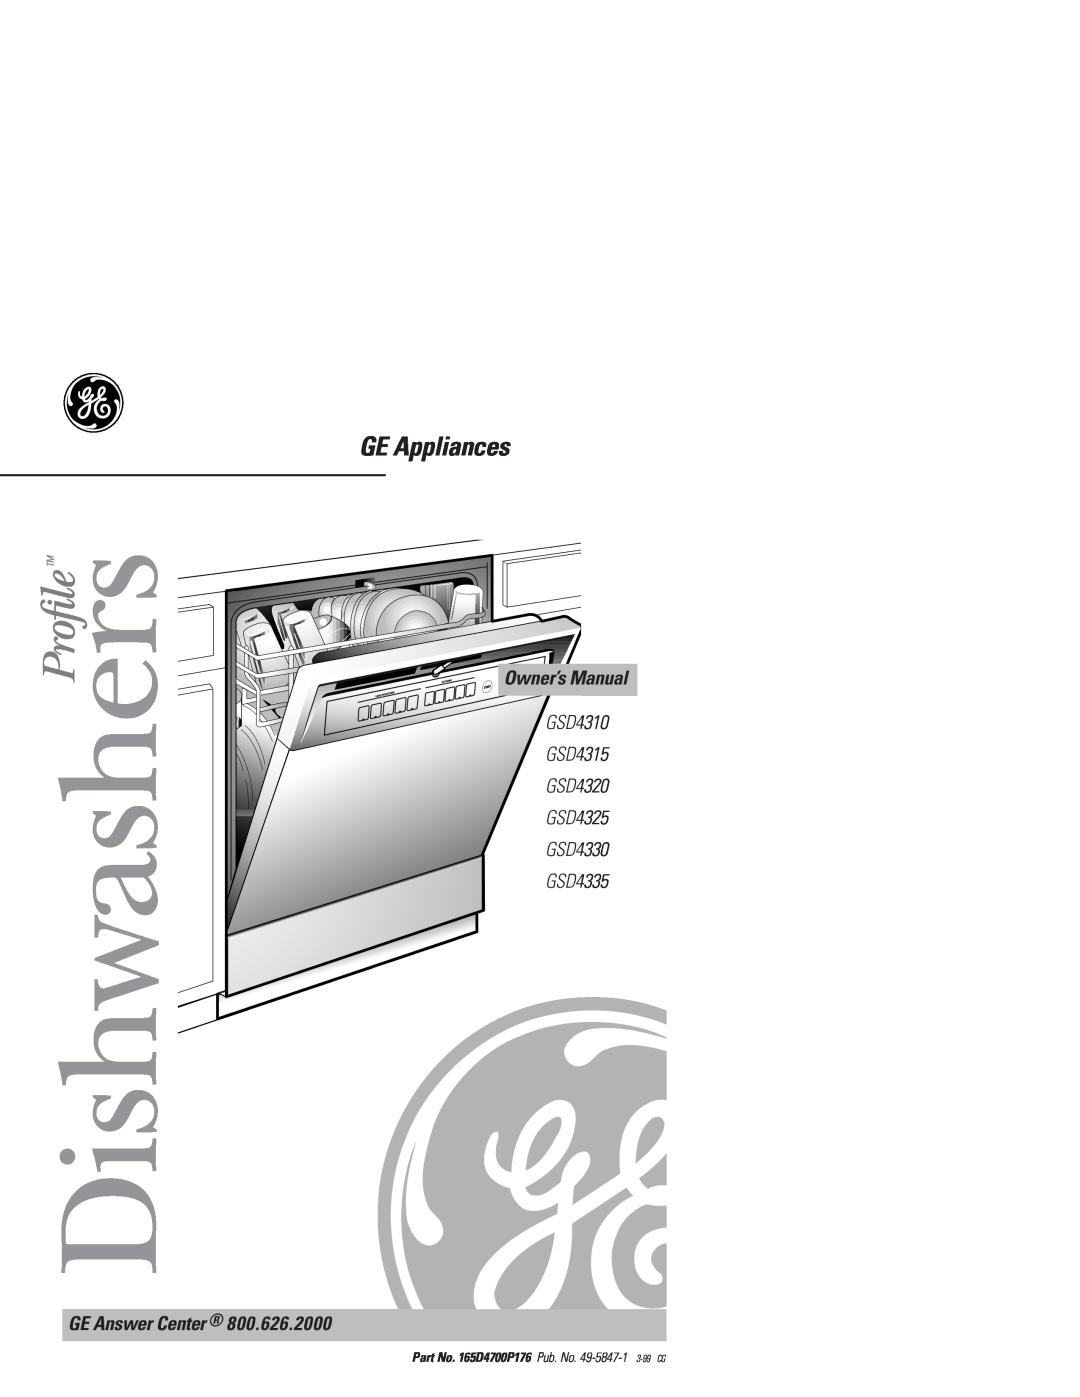 GE owner manual GE Appliances, GE Answer Center, GSD4310 GSD4315 GSD4320 GSD4325 GSD4330 GSD4335, Dishwashers 